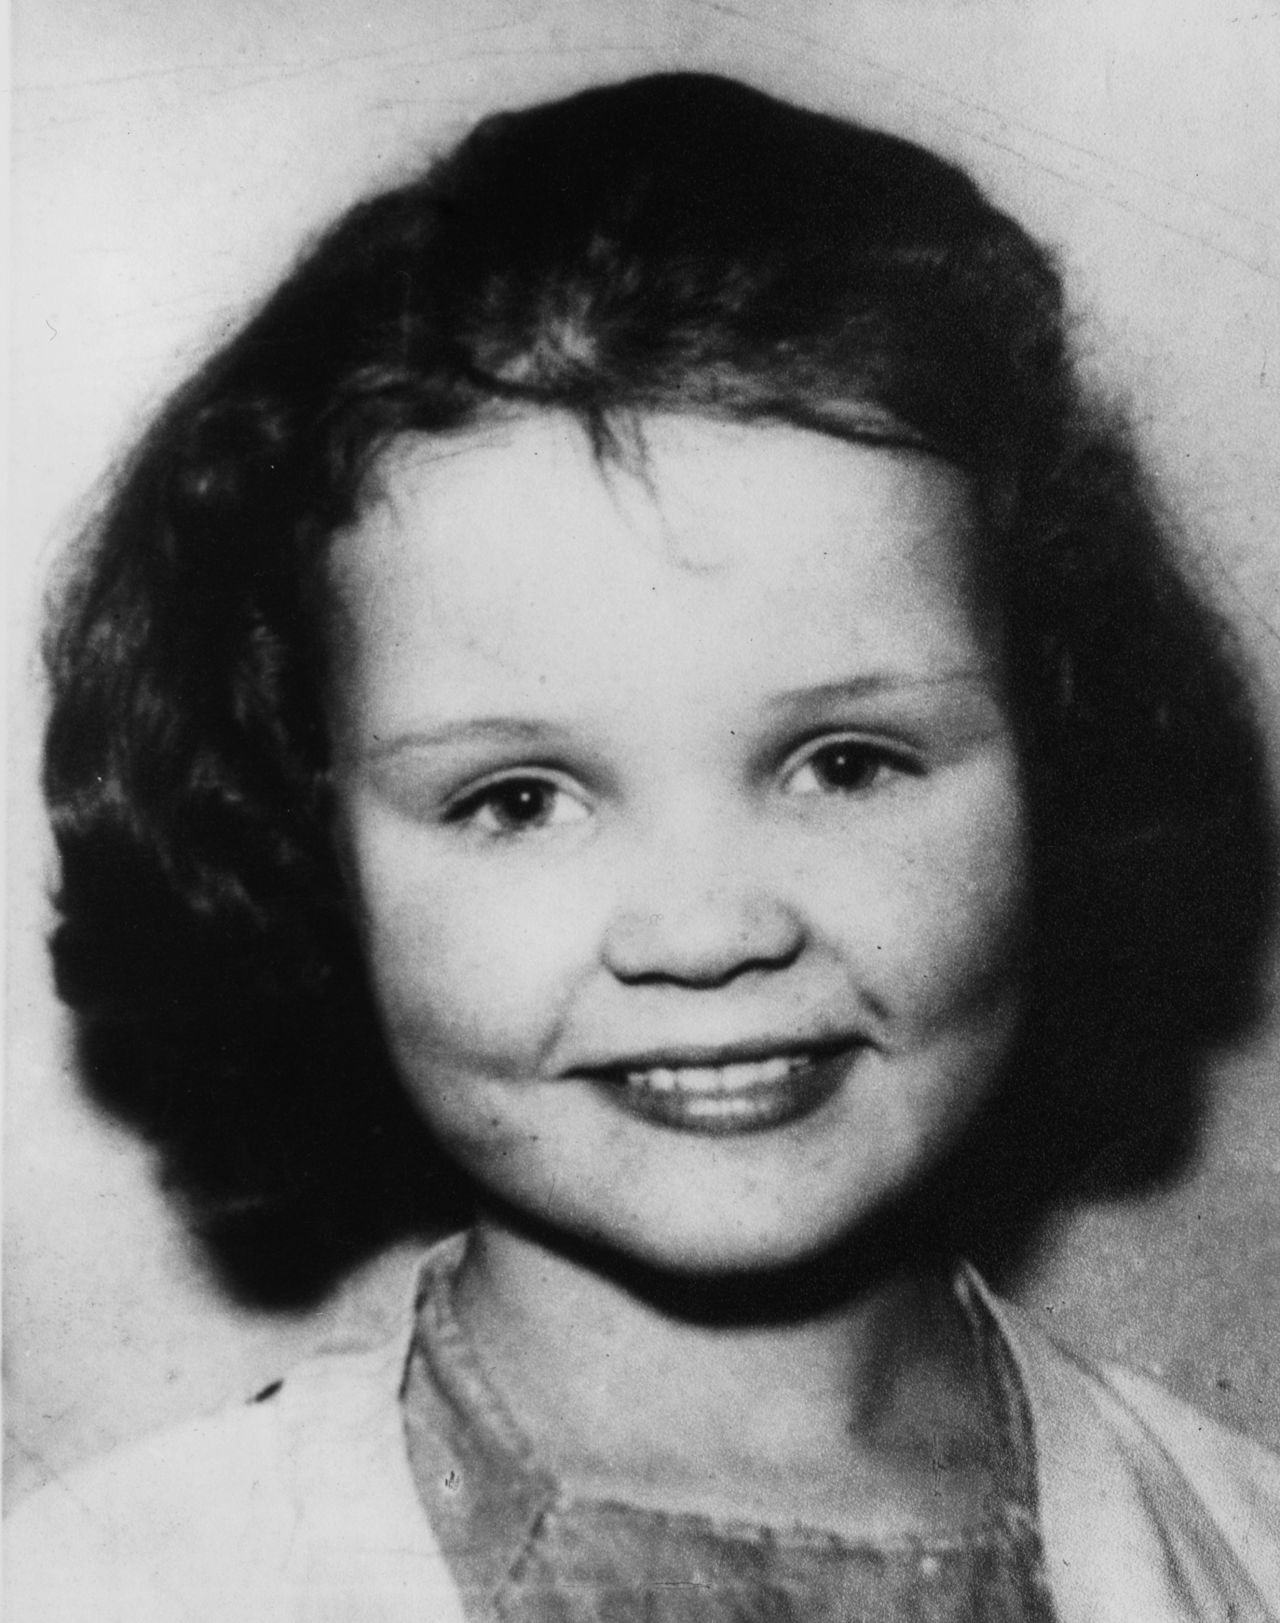 Lesley Ann Downey, pictured aged 10. Lesley Ann was killed by Brady and Hindley after they abducted her on Boxing Day in 1964. 